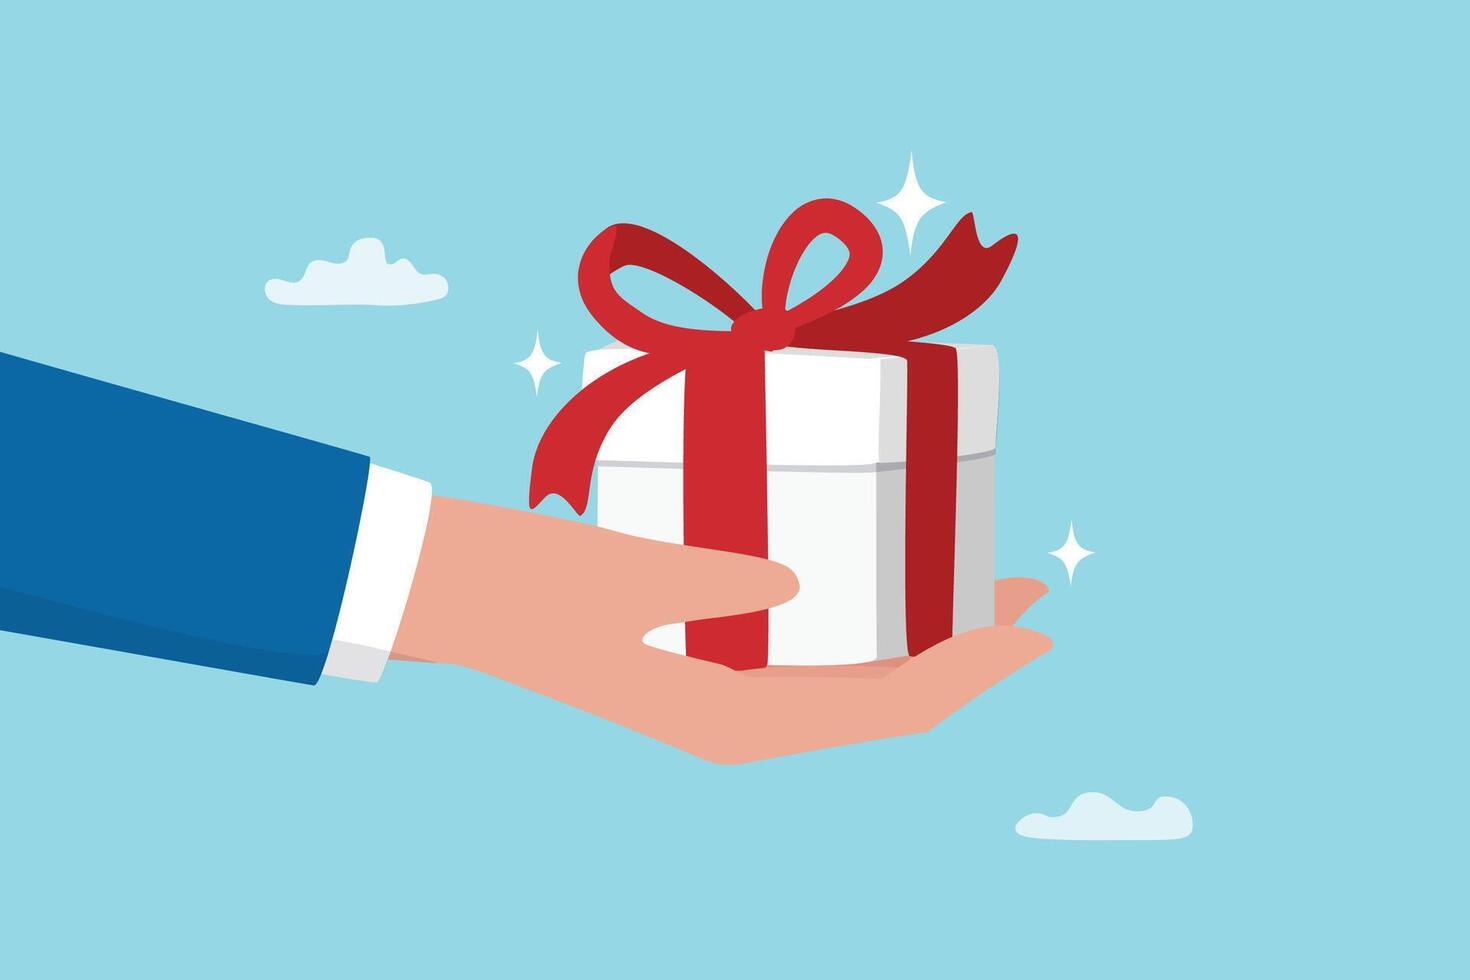 Gift reward program, bonus or surprise present for customer, employee reward or lucky prize, birthday gift box or festive incentive, special loyalty program concept, hand giving gift box with ribbon. vector